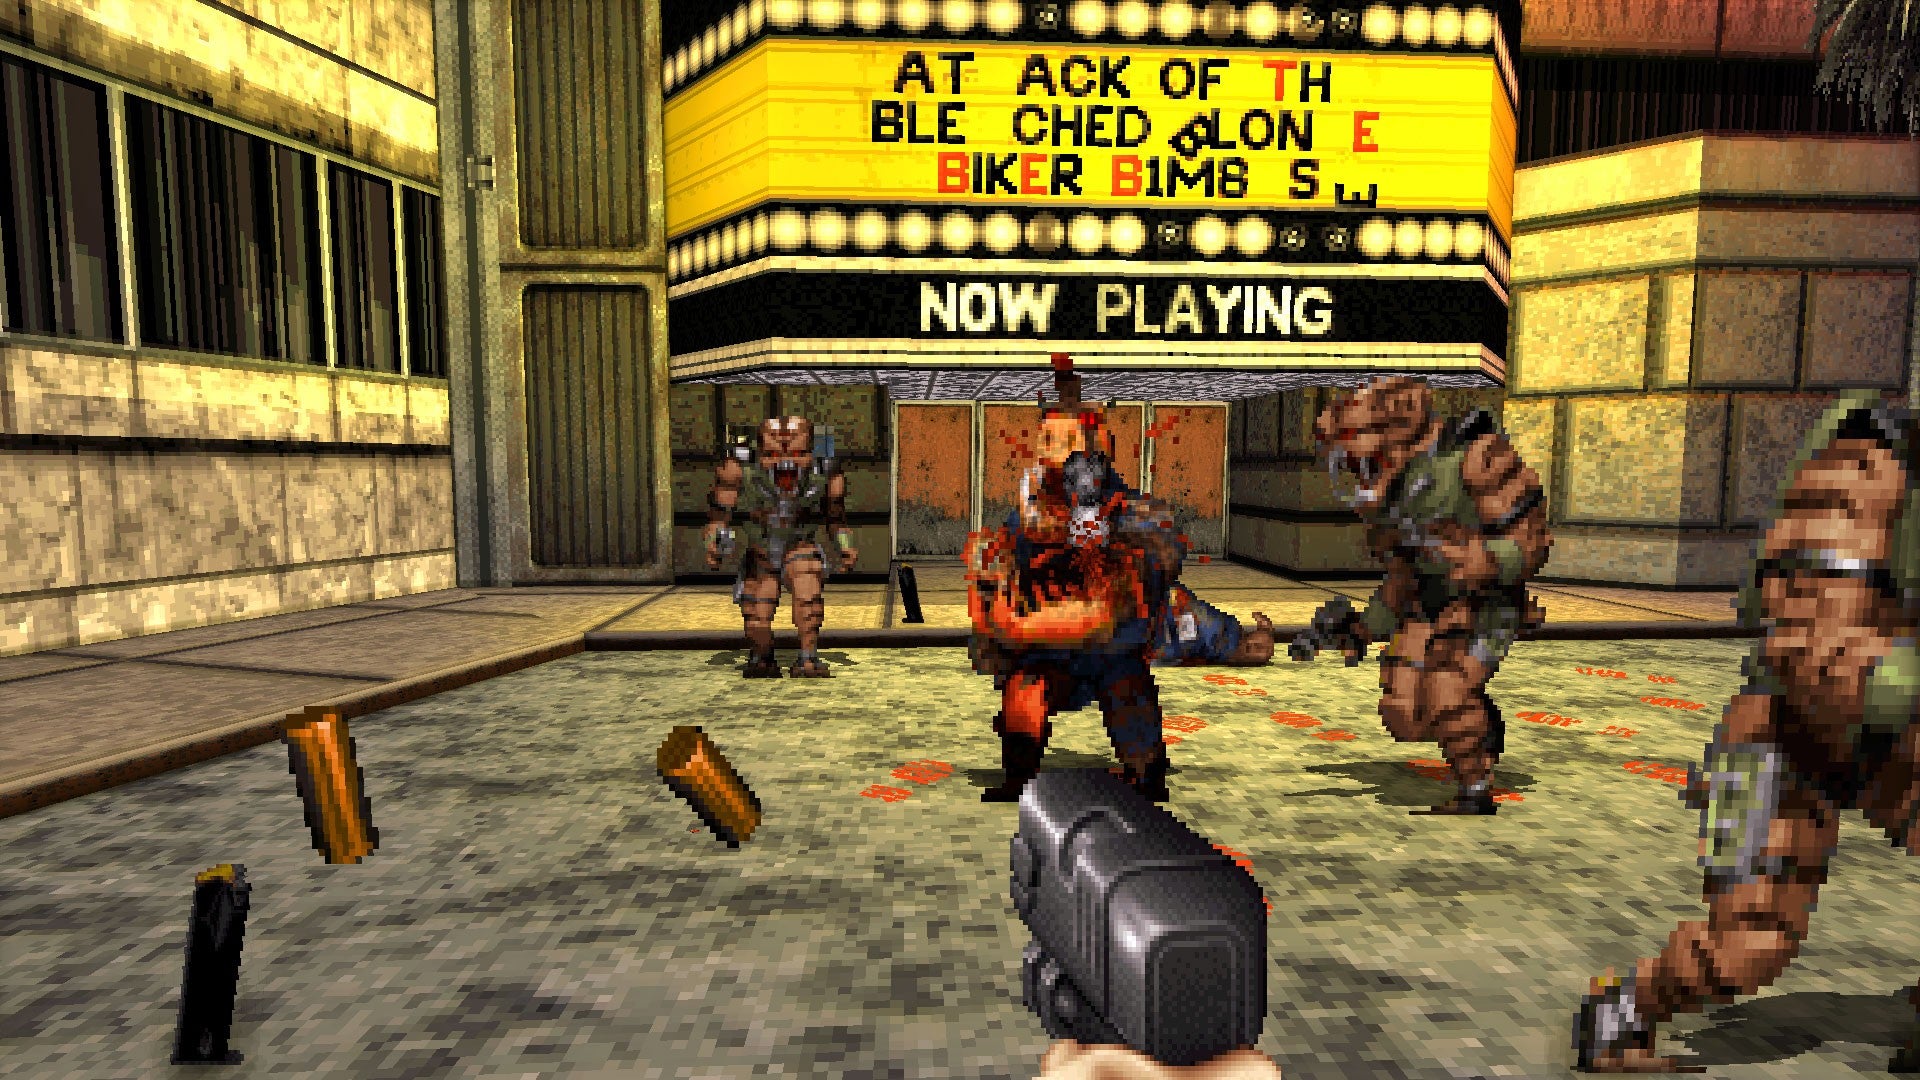 Image for Duke Nukem 3D composer Bobby Prince is suing Gearbox Software and Valve over his soundtrack